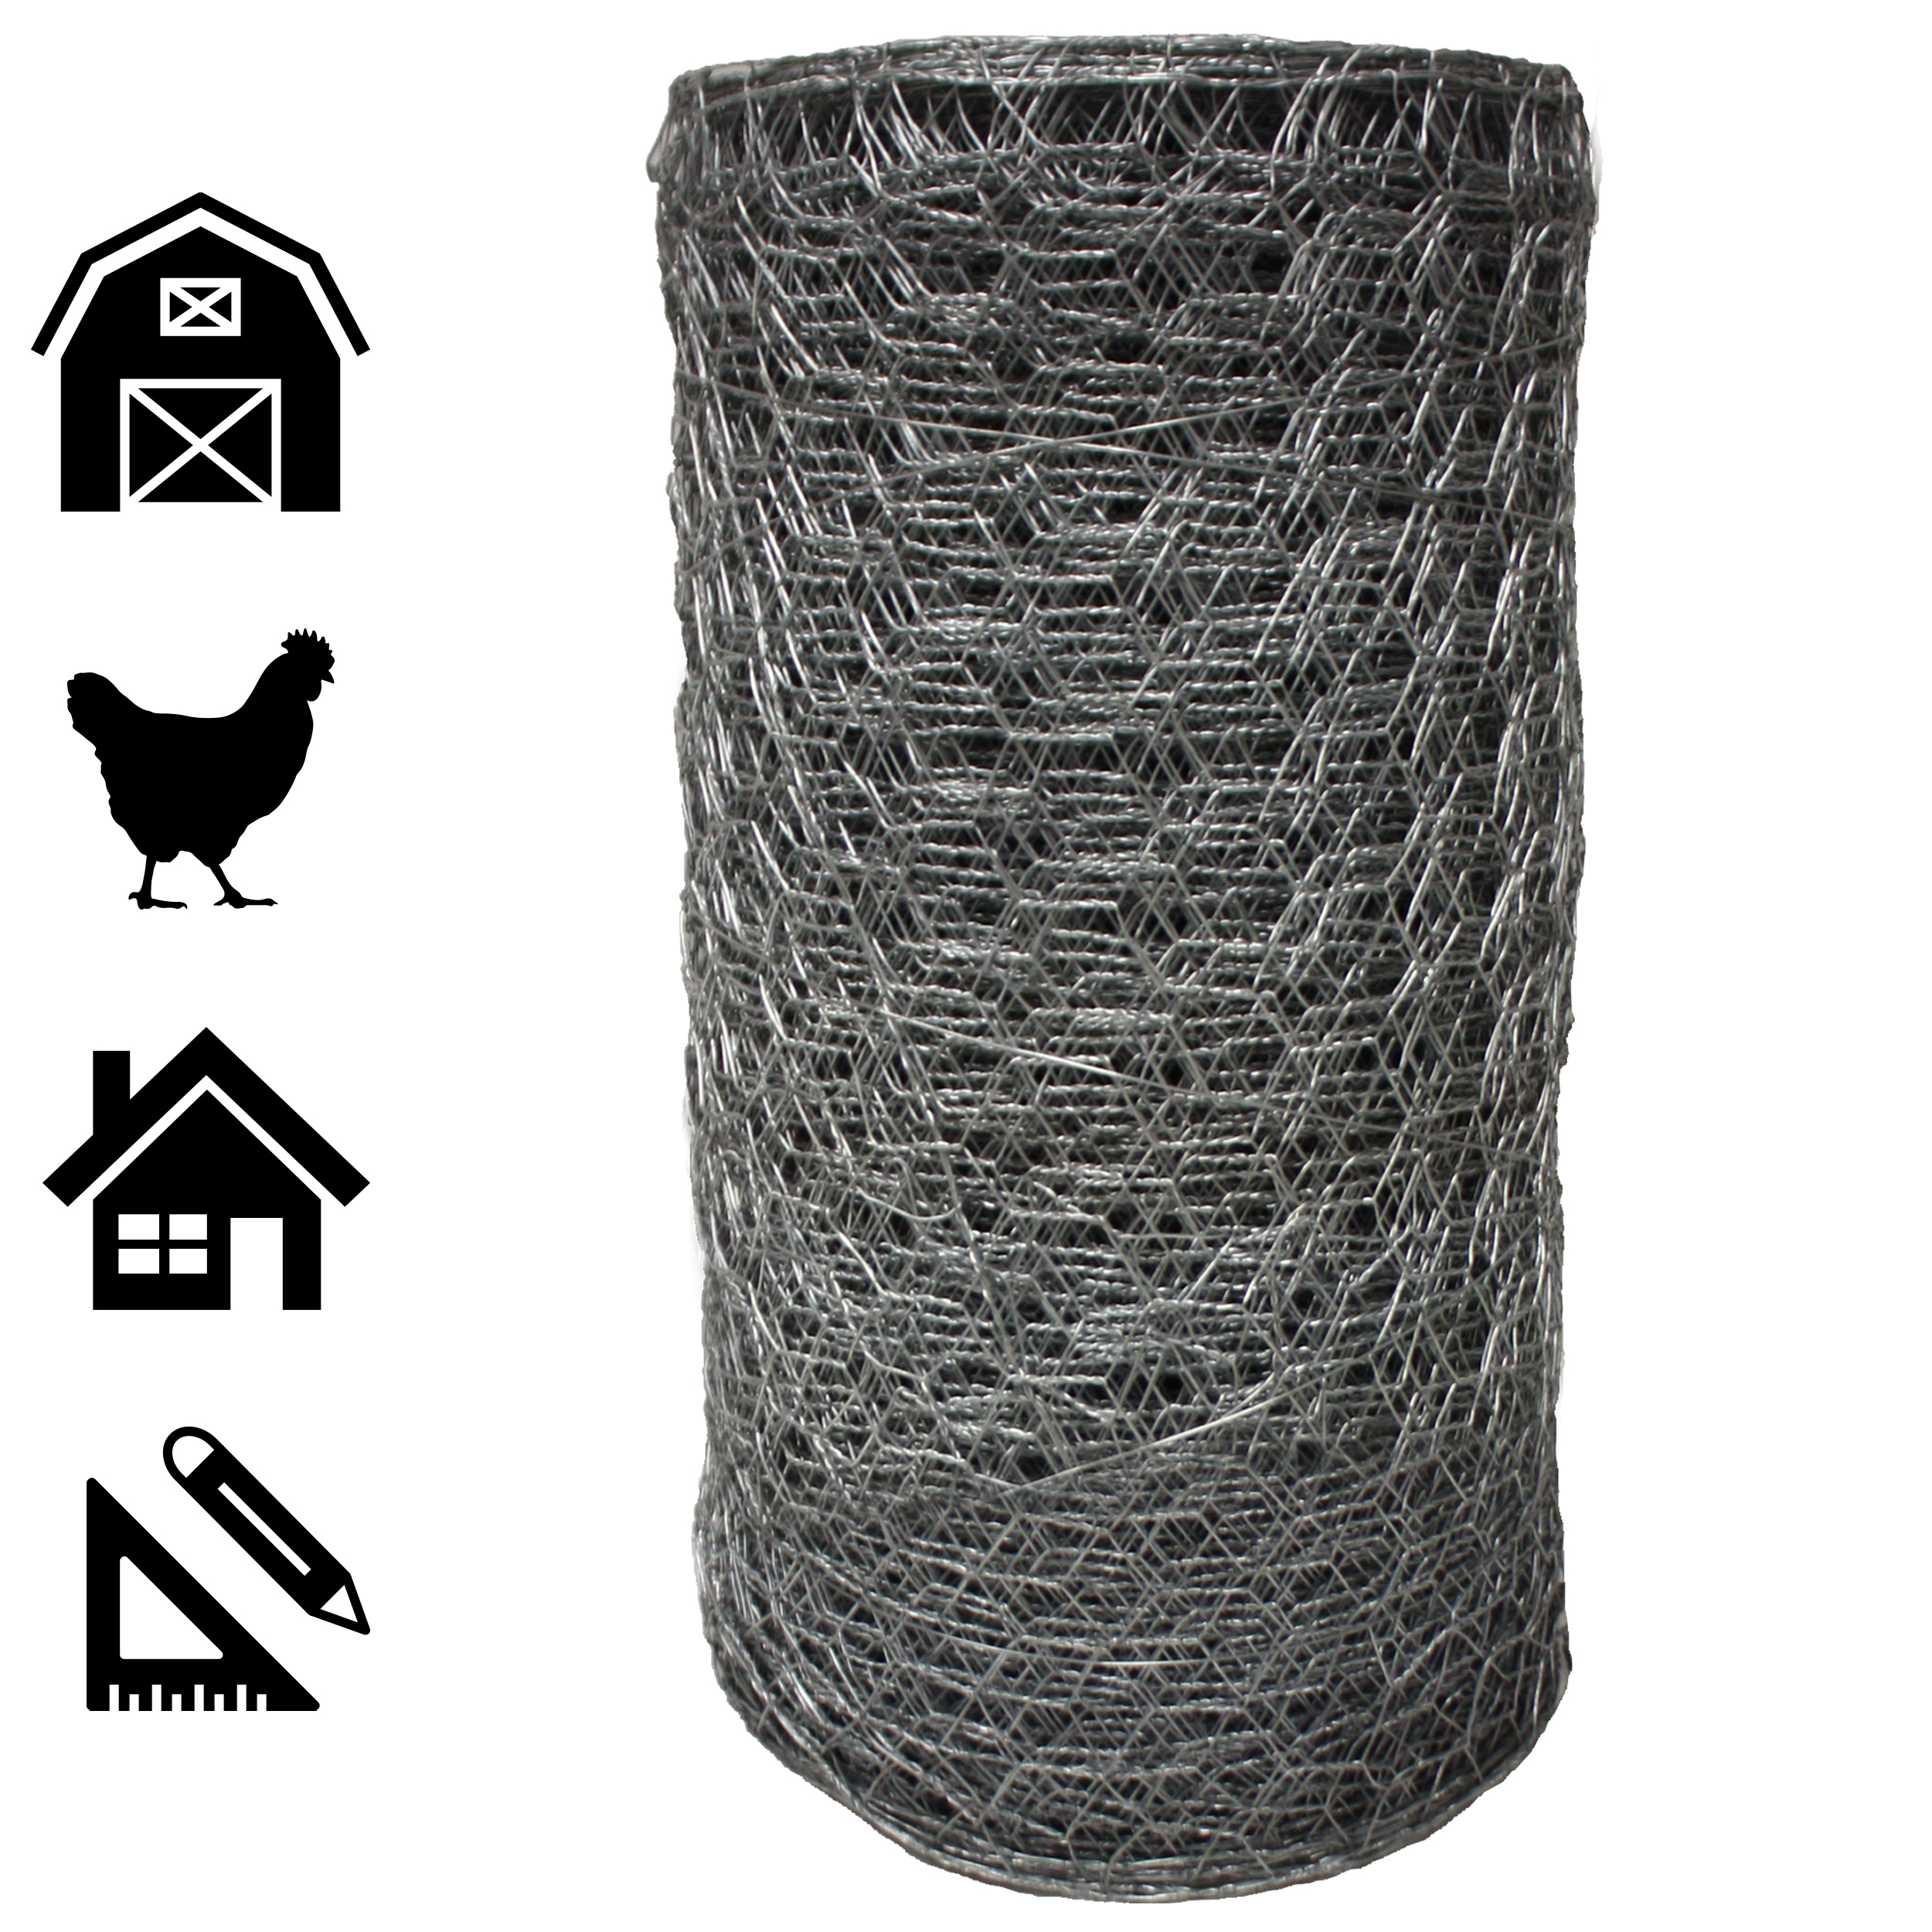 GARDEN CRAFT 25-ft x 3-ft Gray Galvanized Steel Chicken Wire Rolled Fencing  with Mesh Size 1-in in the Rolled Fencing department at